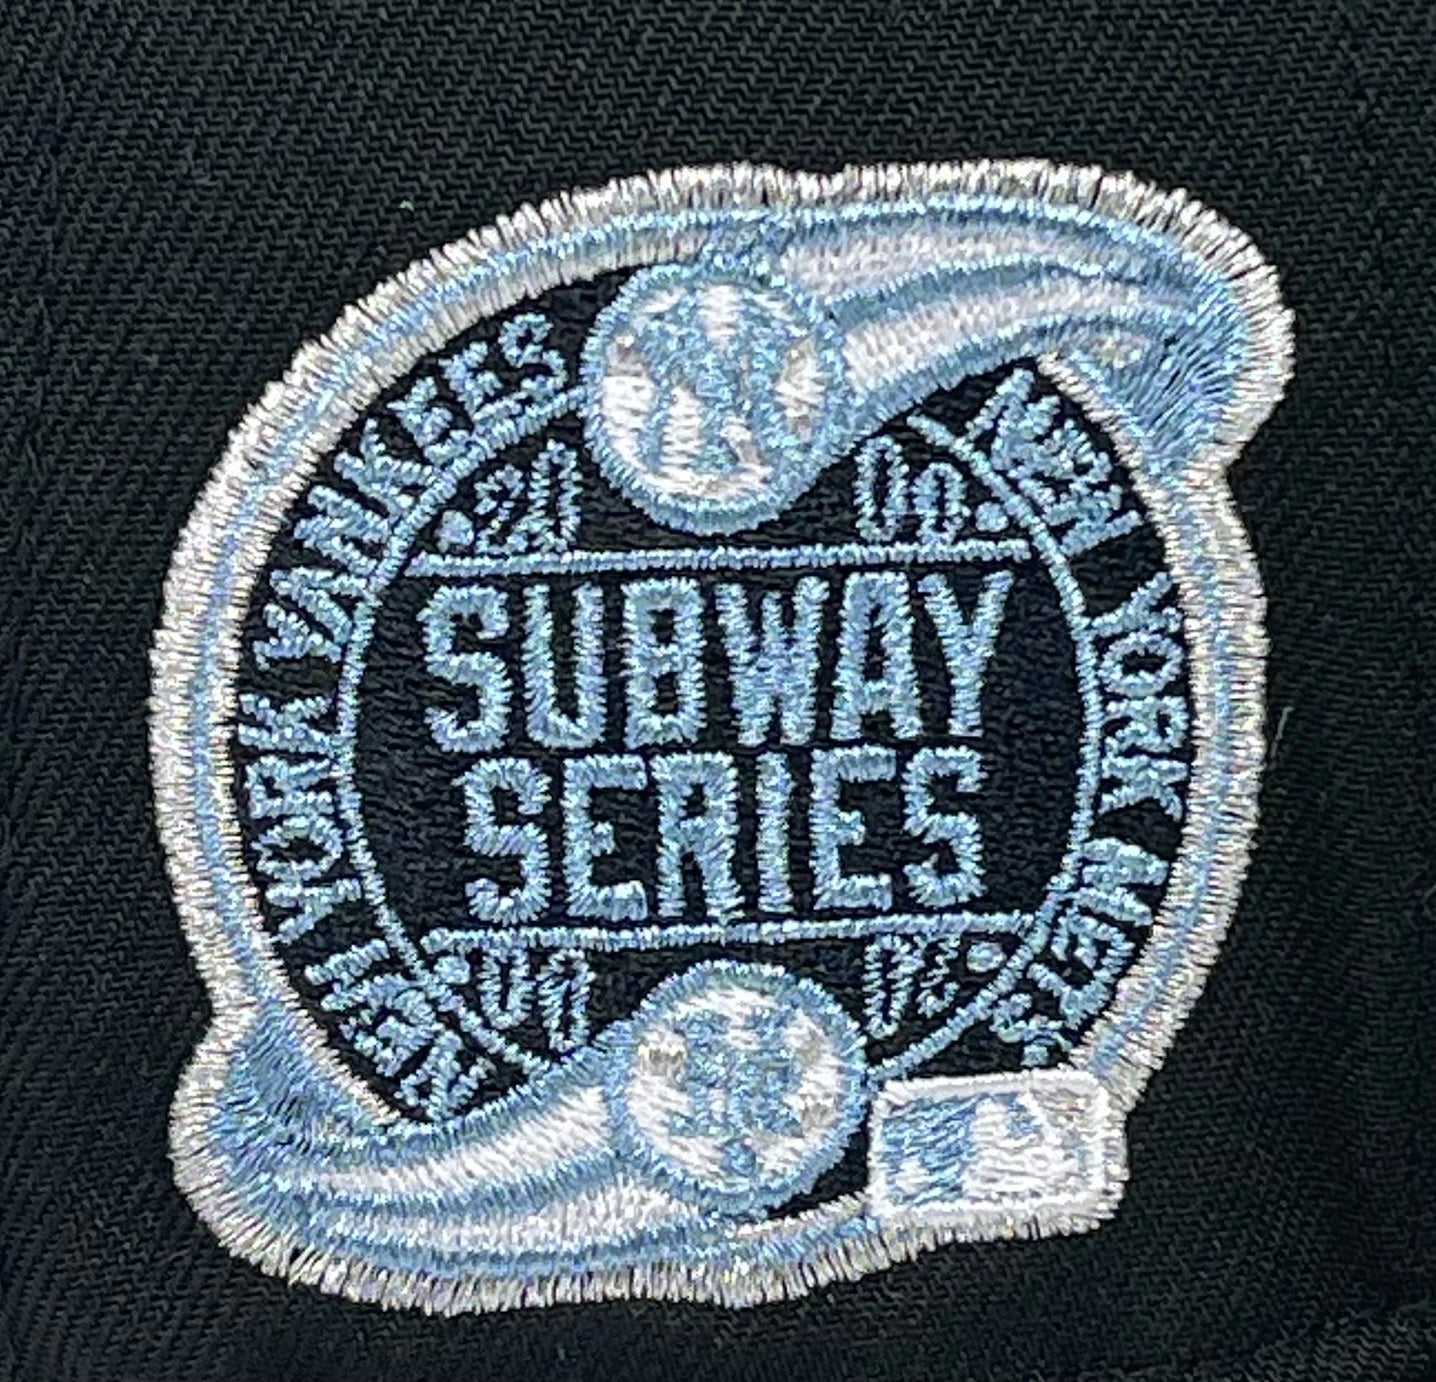 NEW YORK YANKEES (BLK/ BLUE) (2000 SUBWAY SERIES) NEW ERA 59FIFTY FITTED